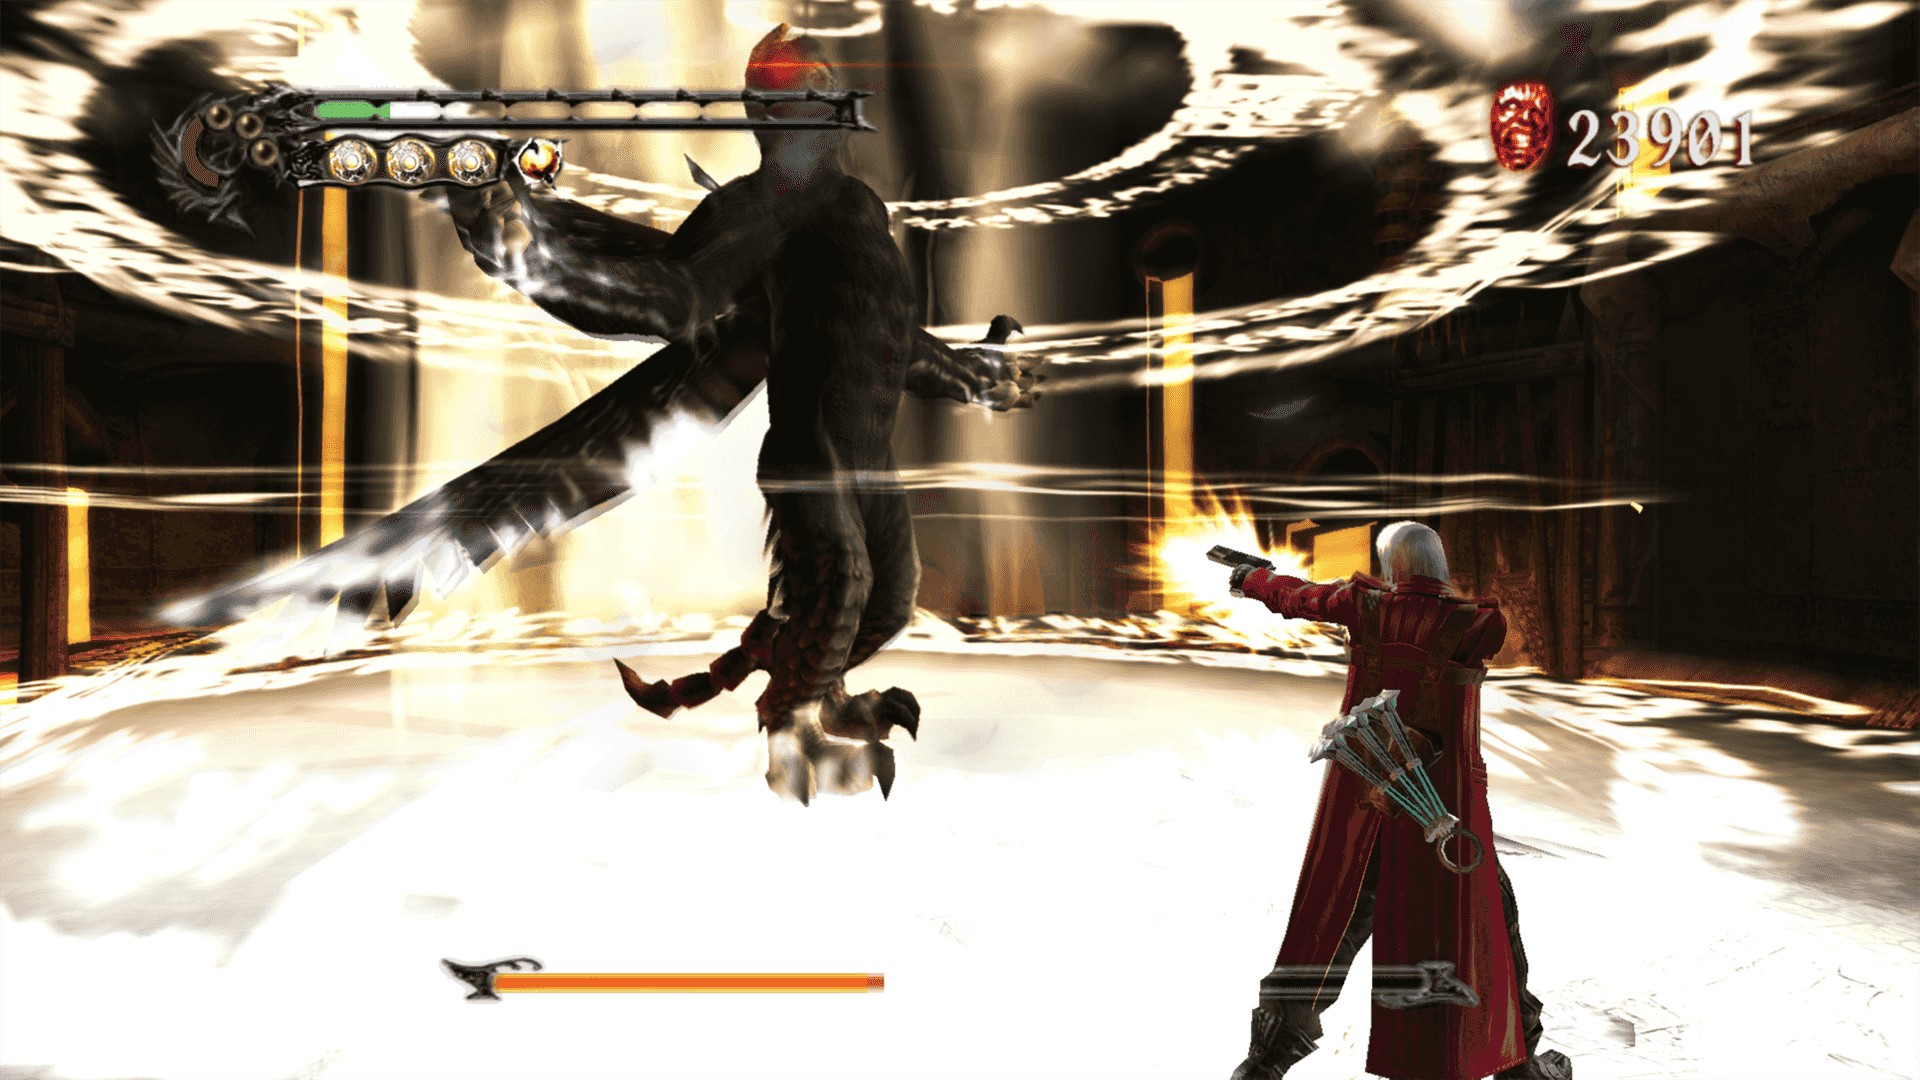 A Newcomer's Perspective of Devil May Cry — Part 1, by E Parker, MediaMastery